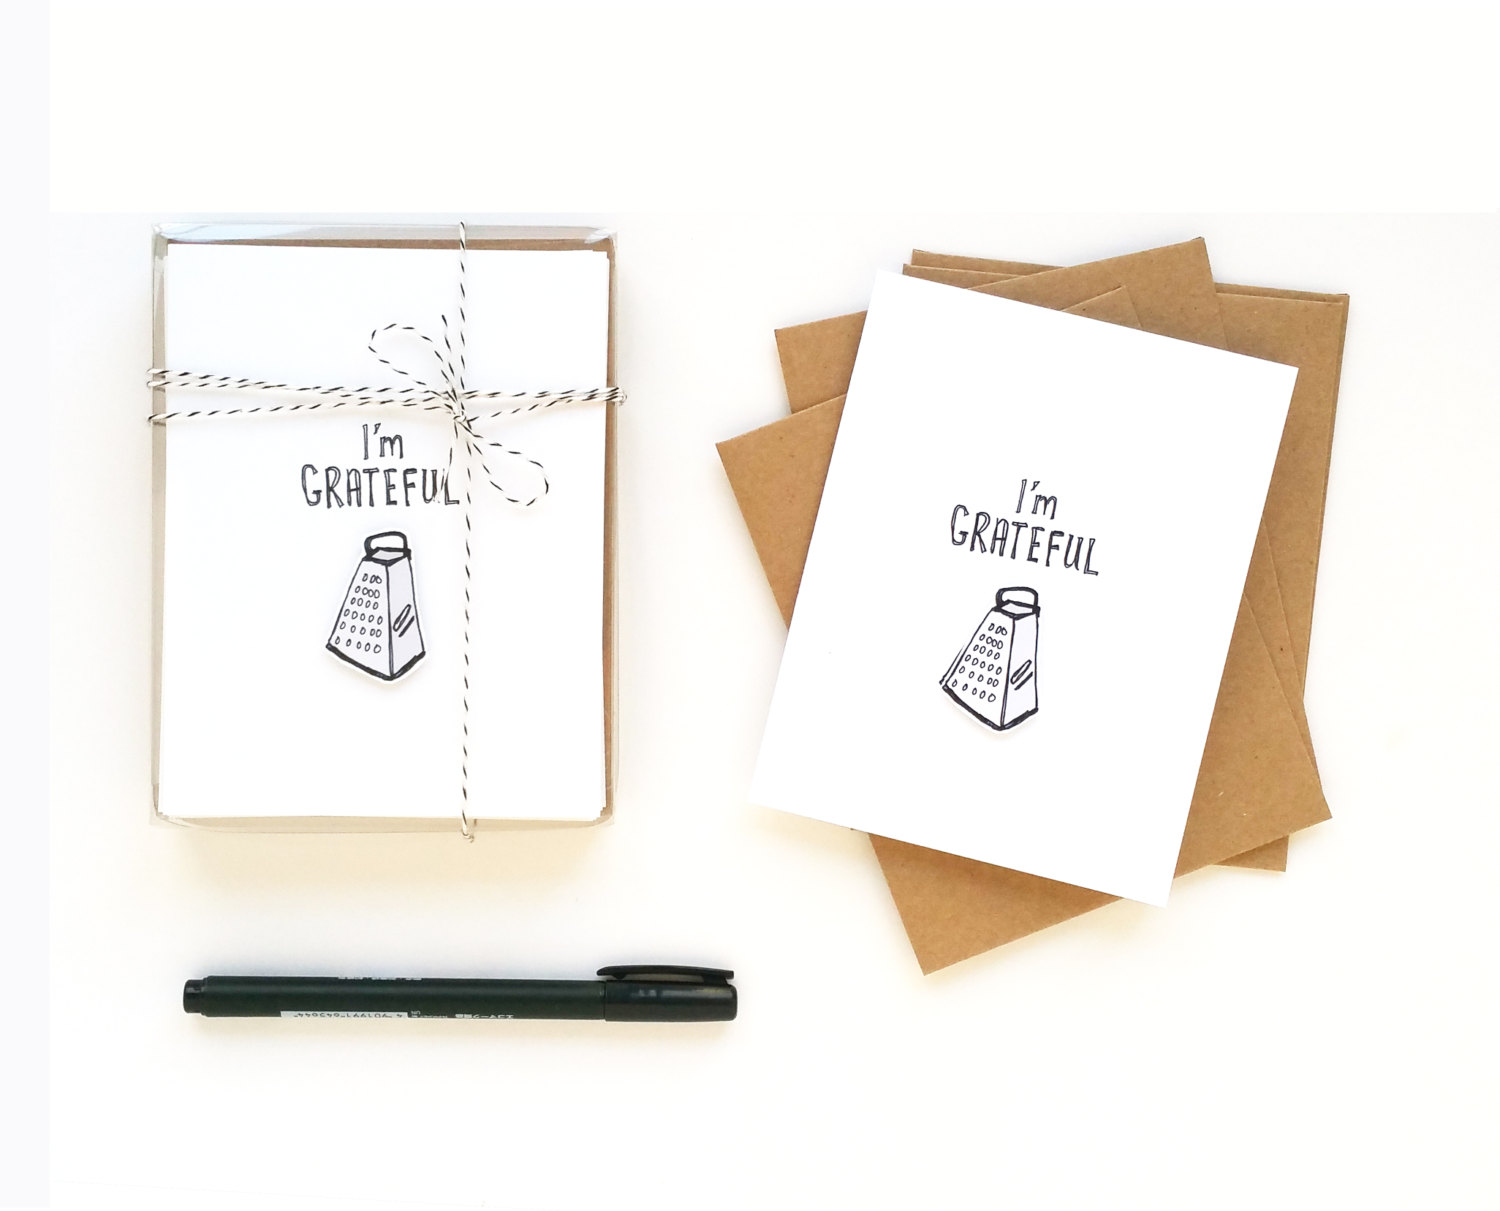 The "I'm Grateful" thank you cards from Yellow Daisy Paper Company are very punny.